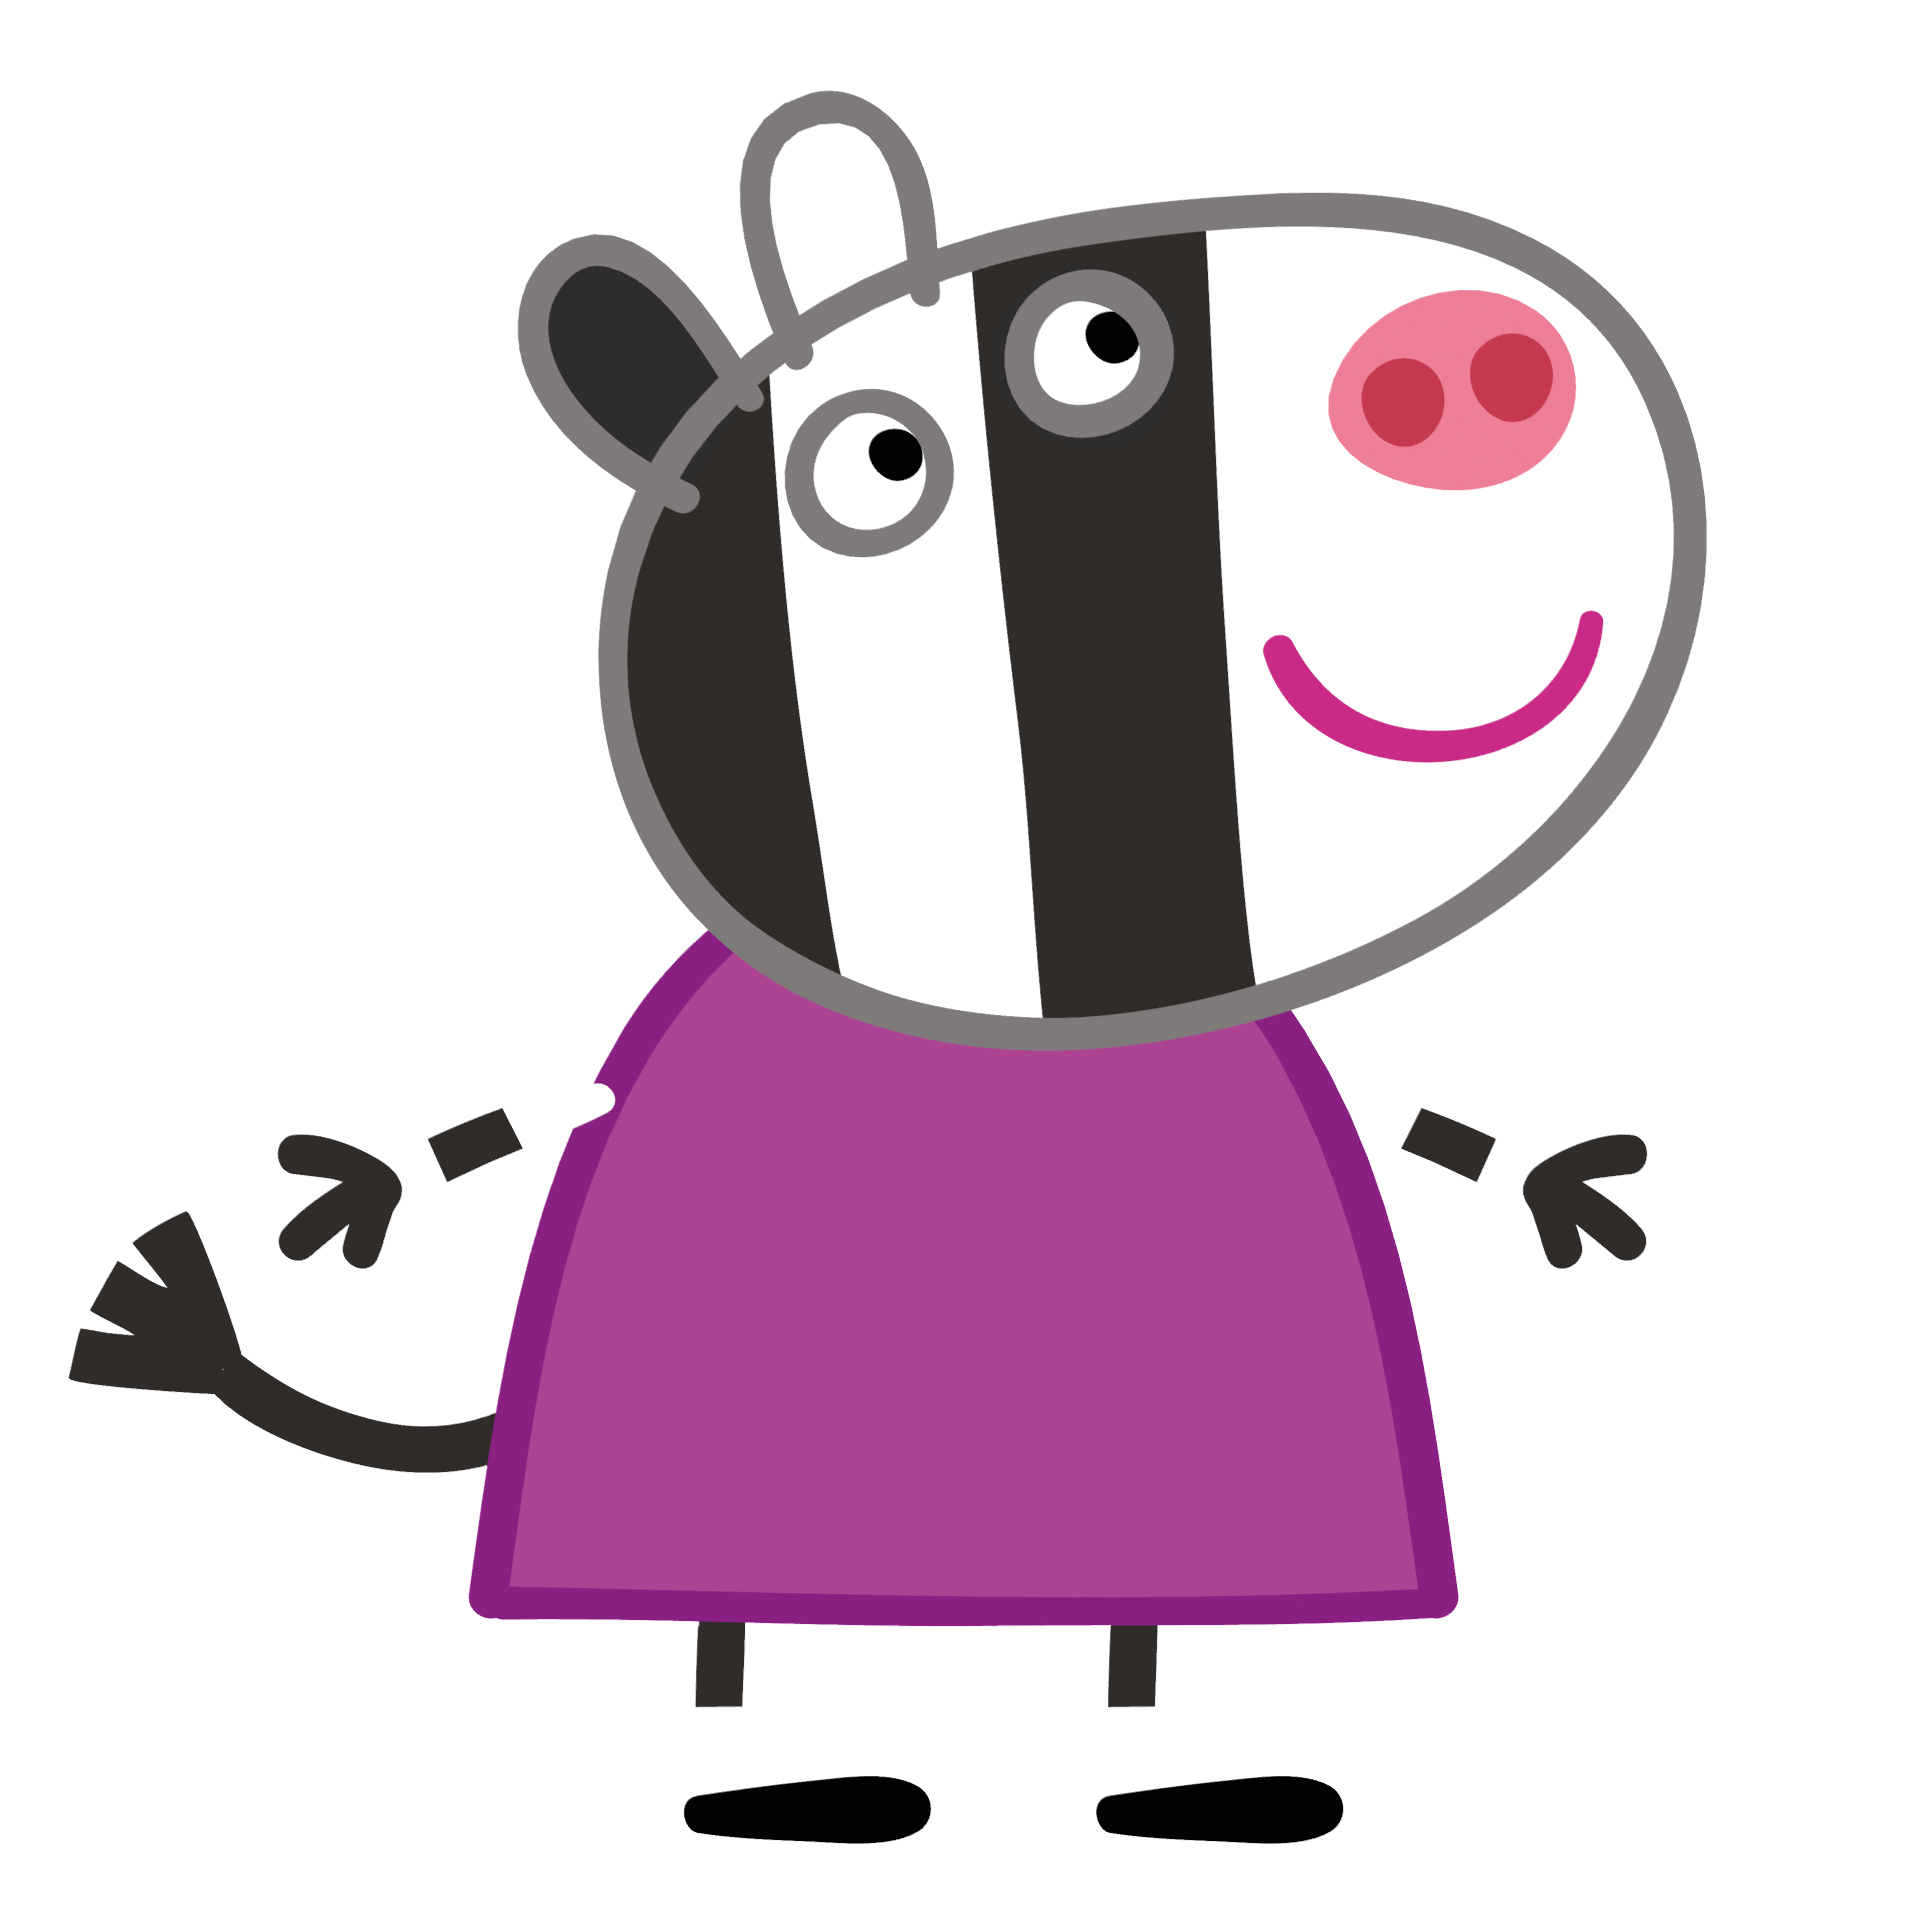 https://static.wikia.nocookie.net/peppapig/images/7/7c/ZoeZebra.png/revision/latest?cb=20200704074931